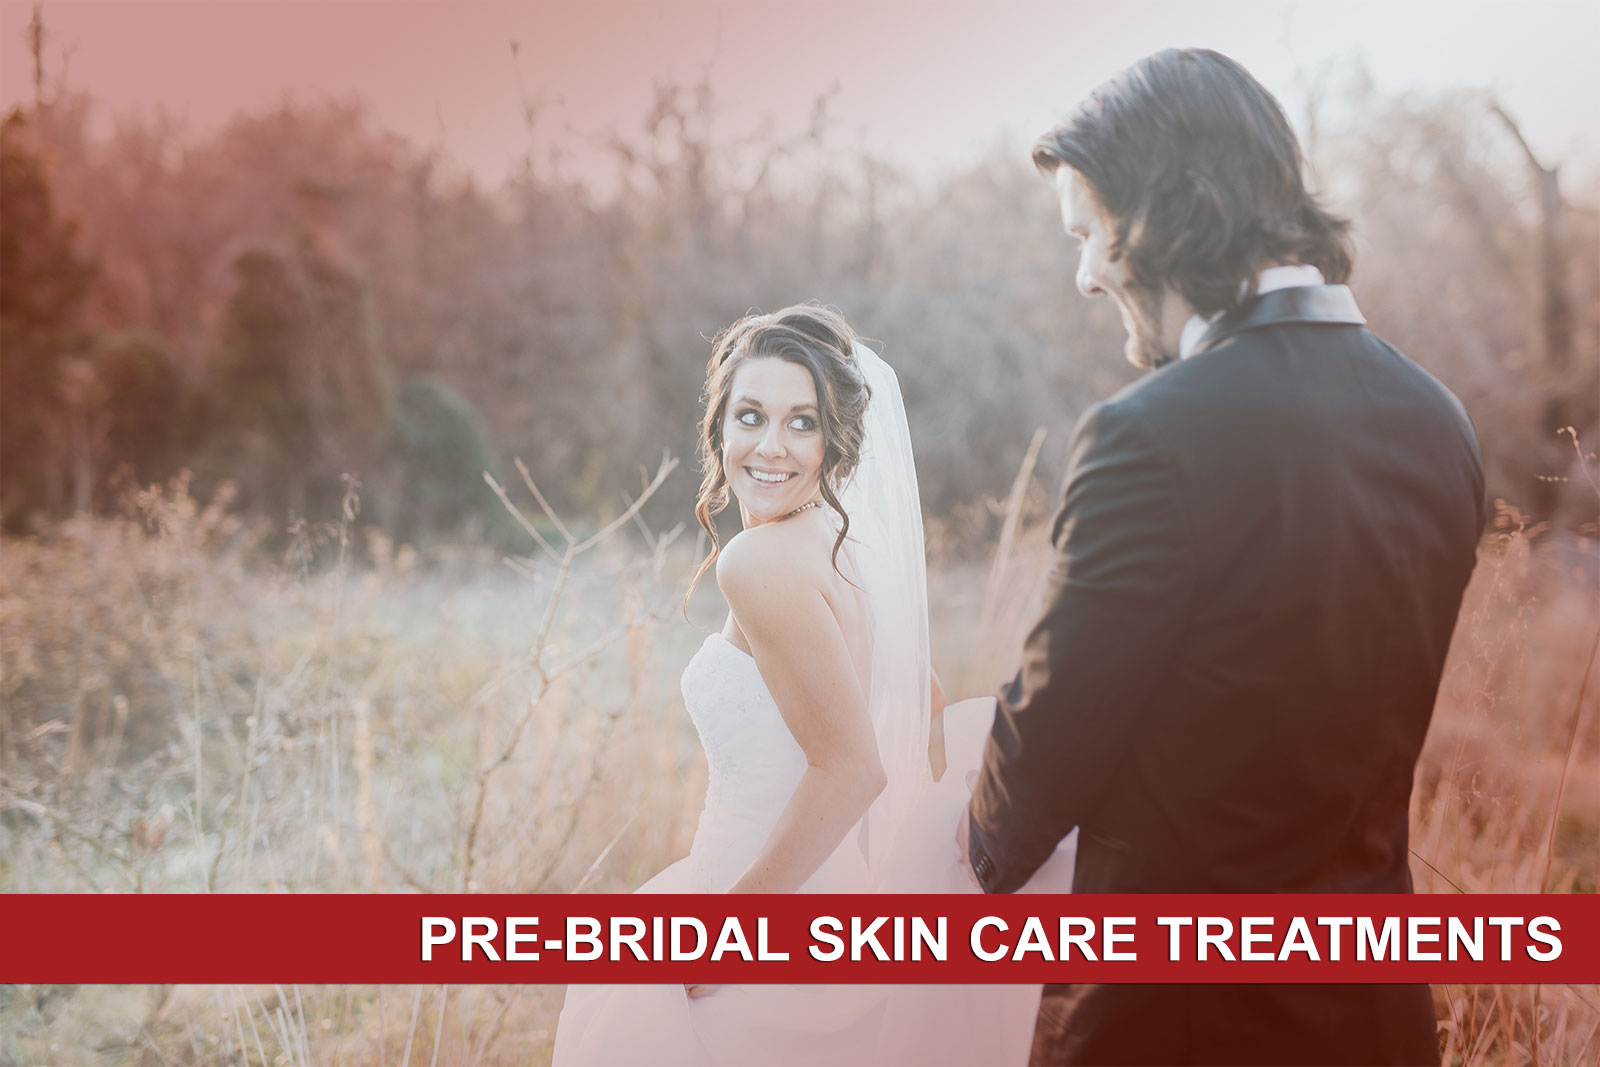 Pre-Bridal Treatments: Finding Your Fit